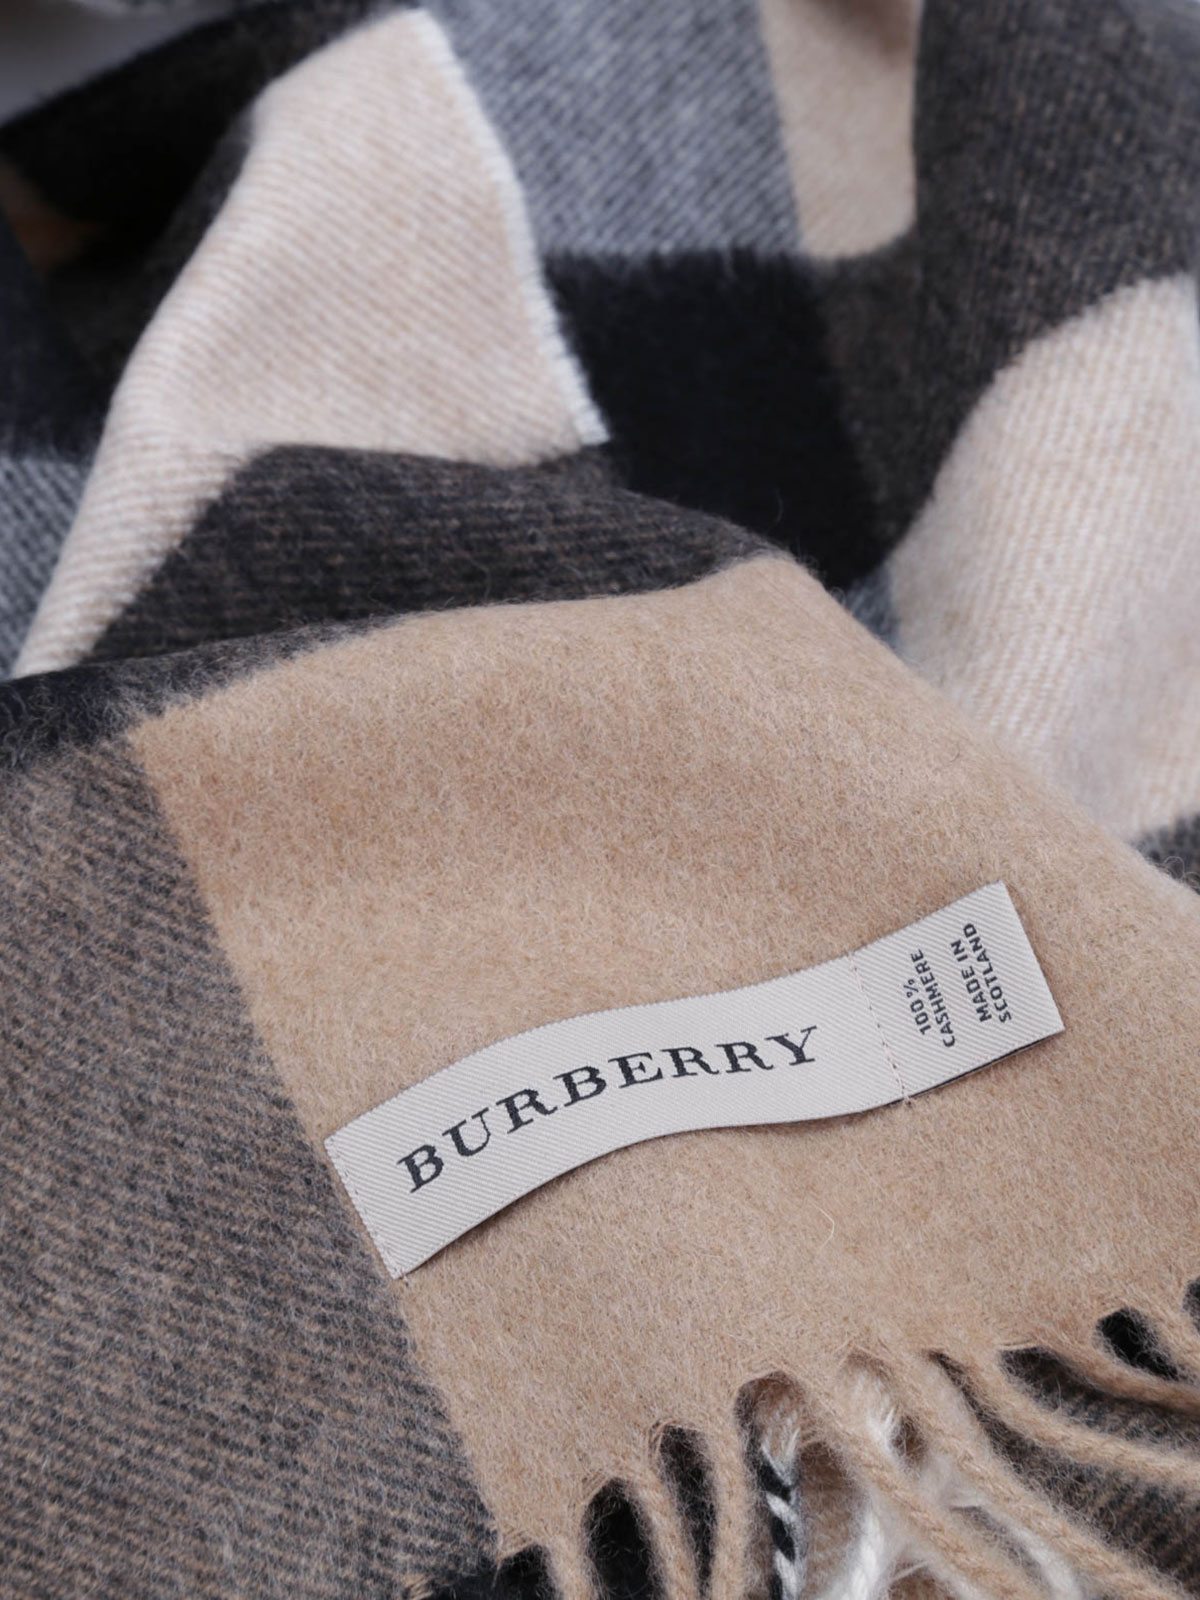 burberry made in scotland